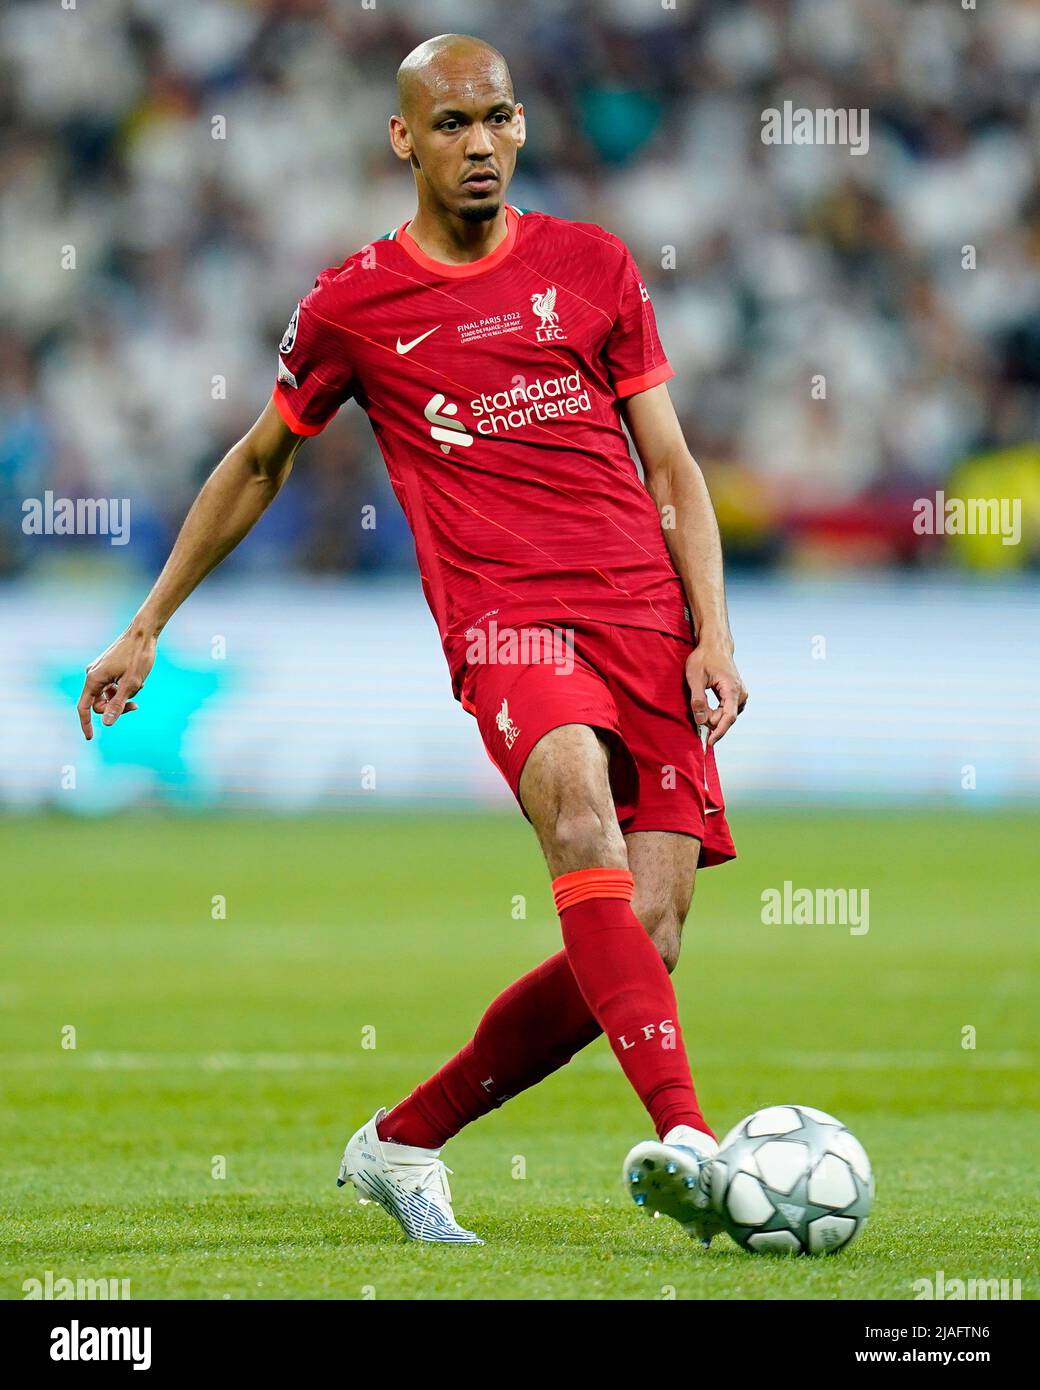 Fabinho of Liverpool FC during the UEFA Champions League Final match between Liverpool FC and Real Madrid played at Stade de France on May 28, 2022 in Paris, France. (Photo / Magma) Stock Photo